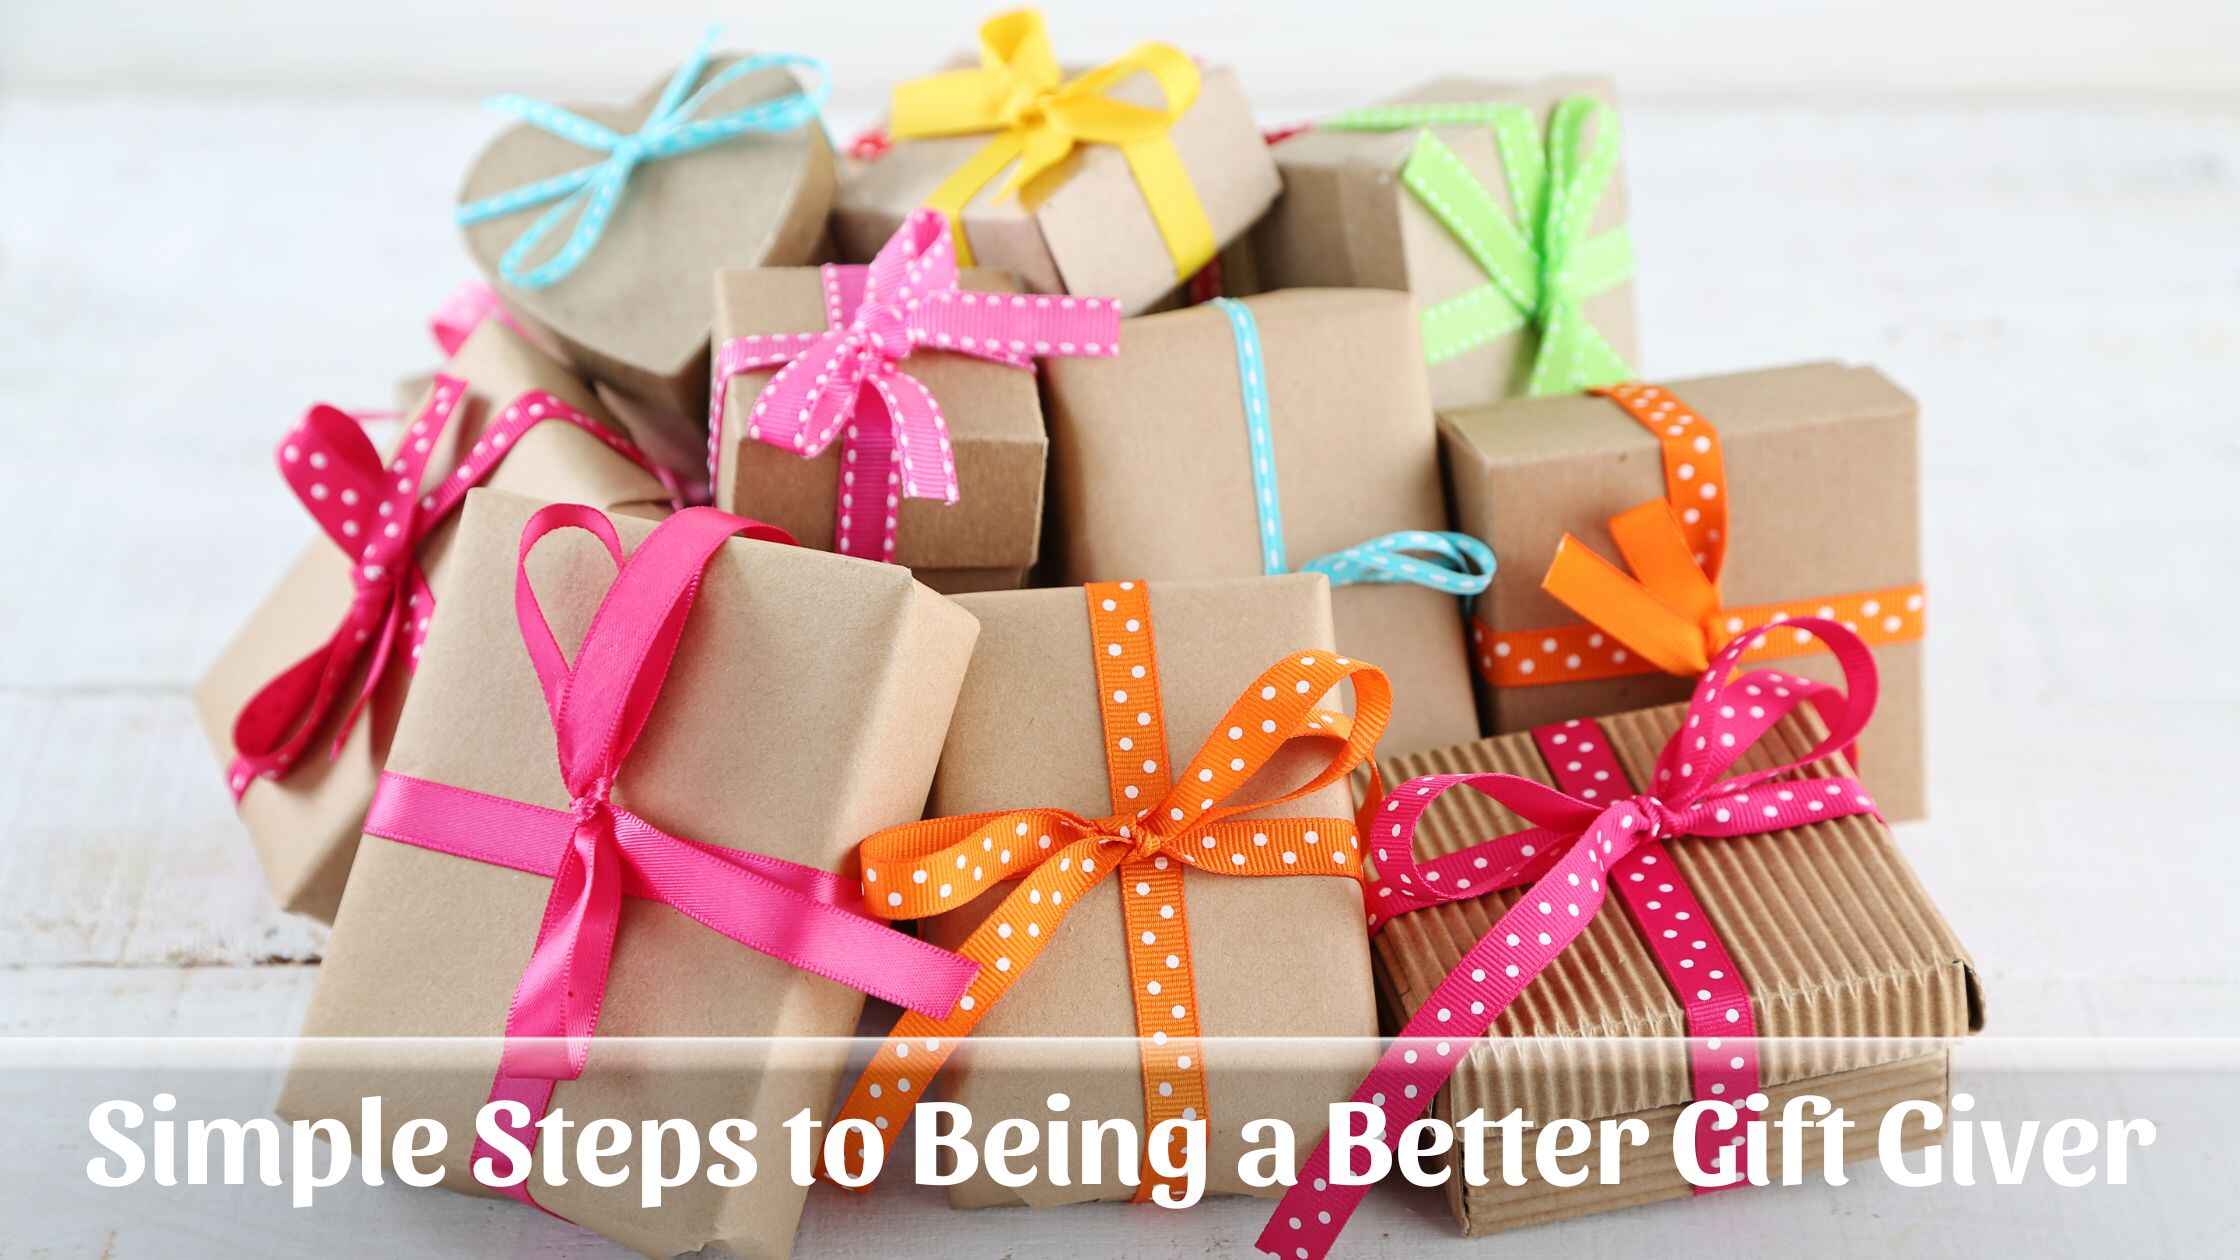 5 Simple Steps To Being A Better Gift Giver (Without Breaking The Bank)